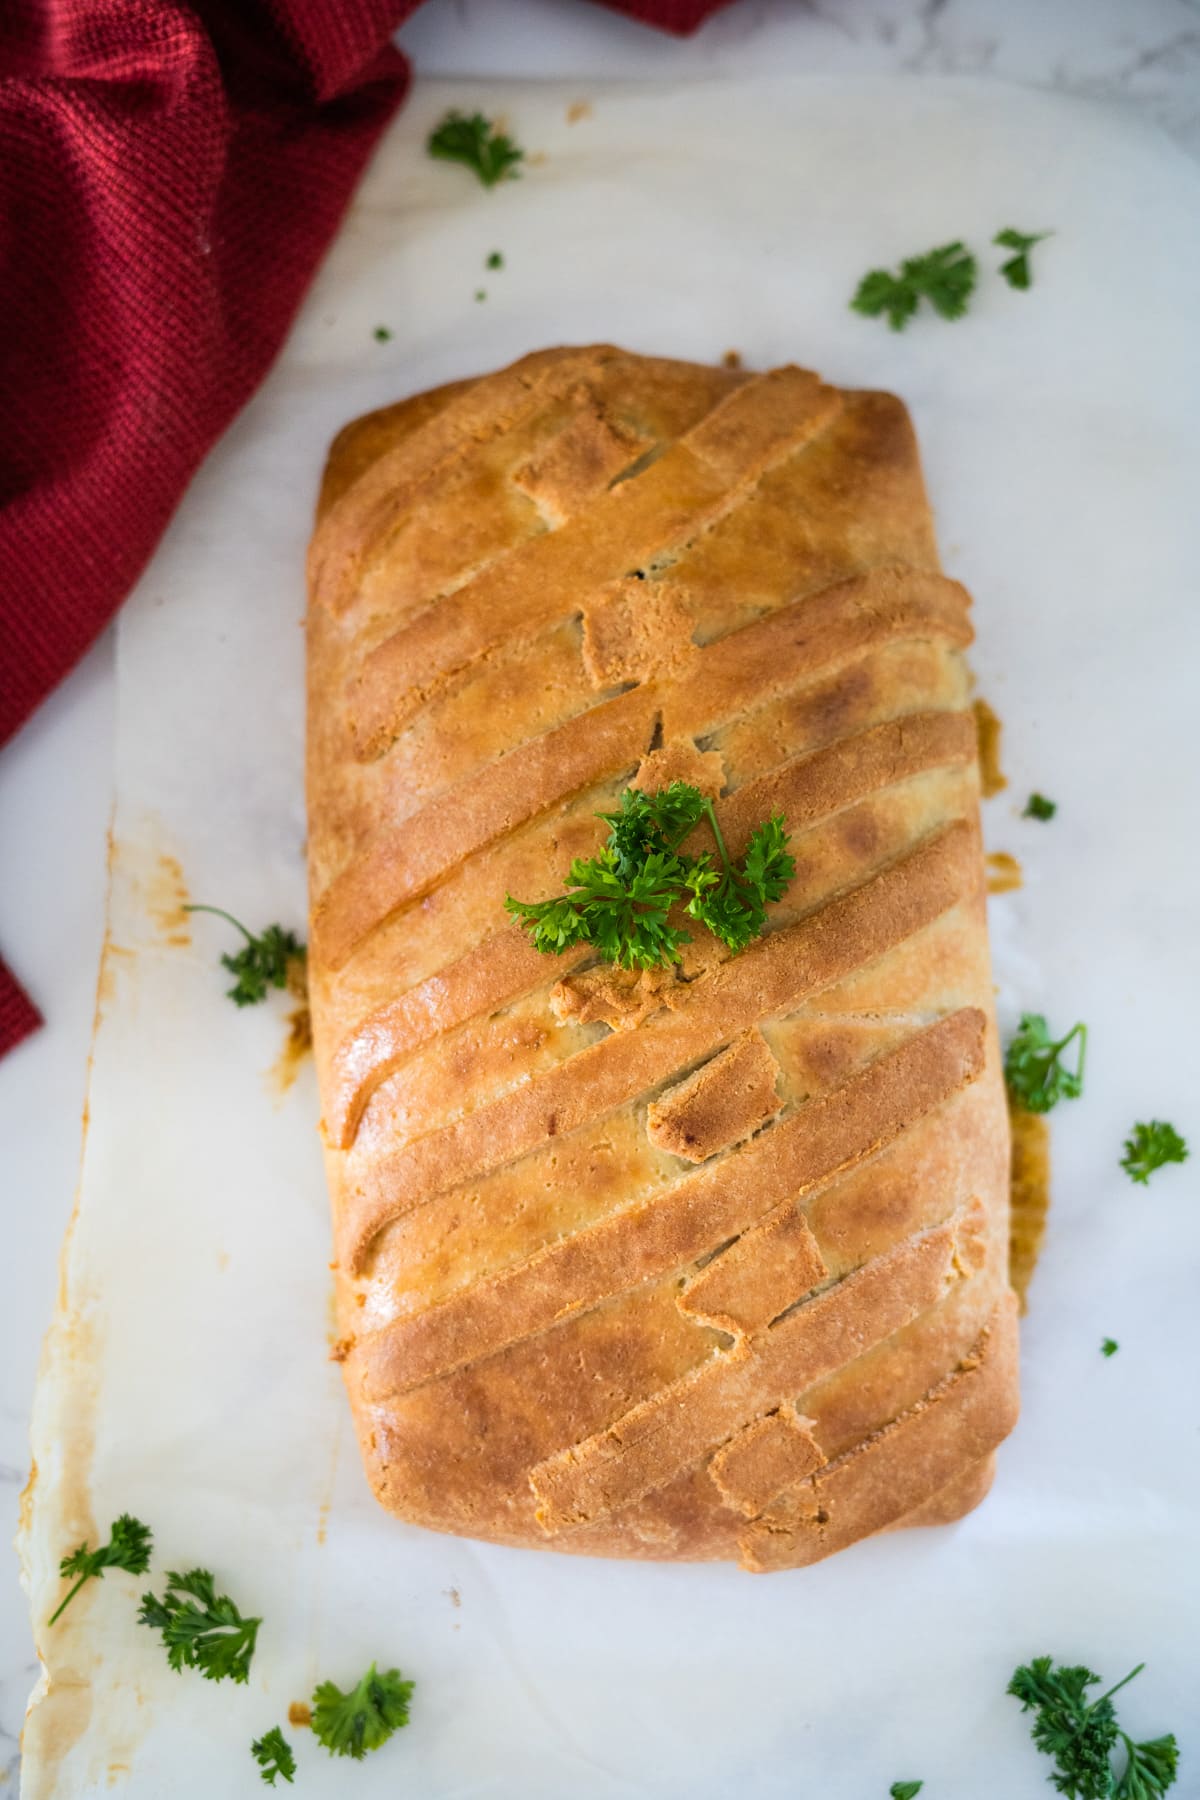 A flavorful vegetable wellington topped with parsley.